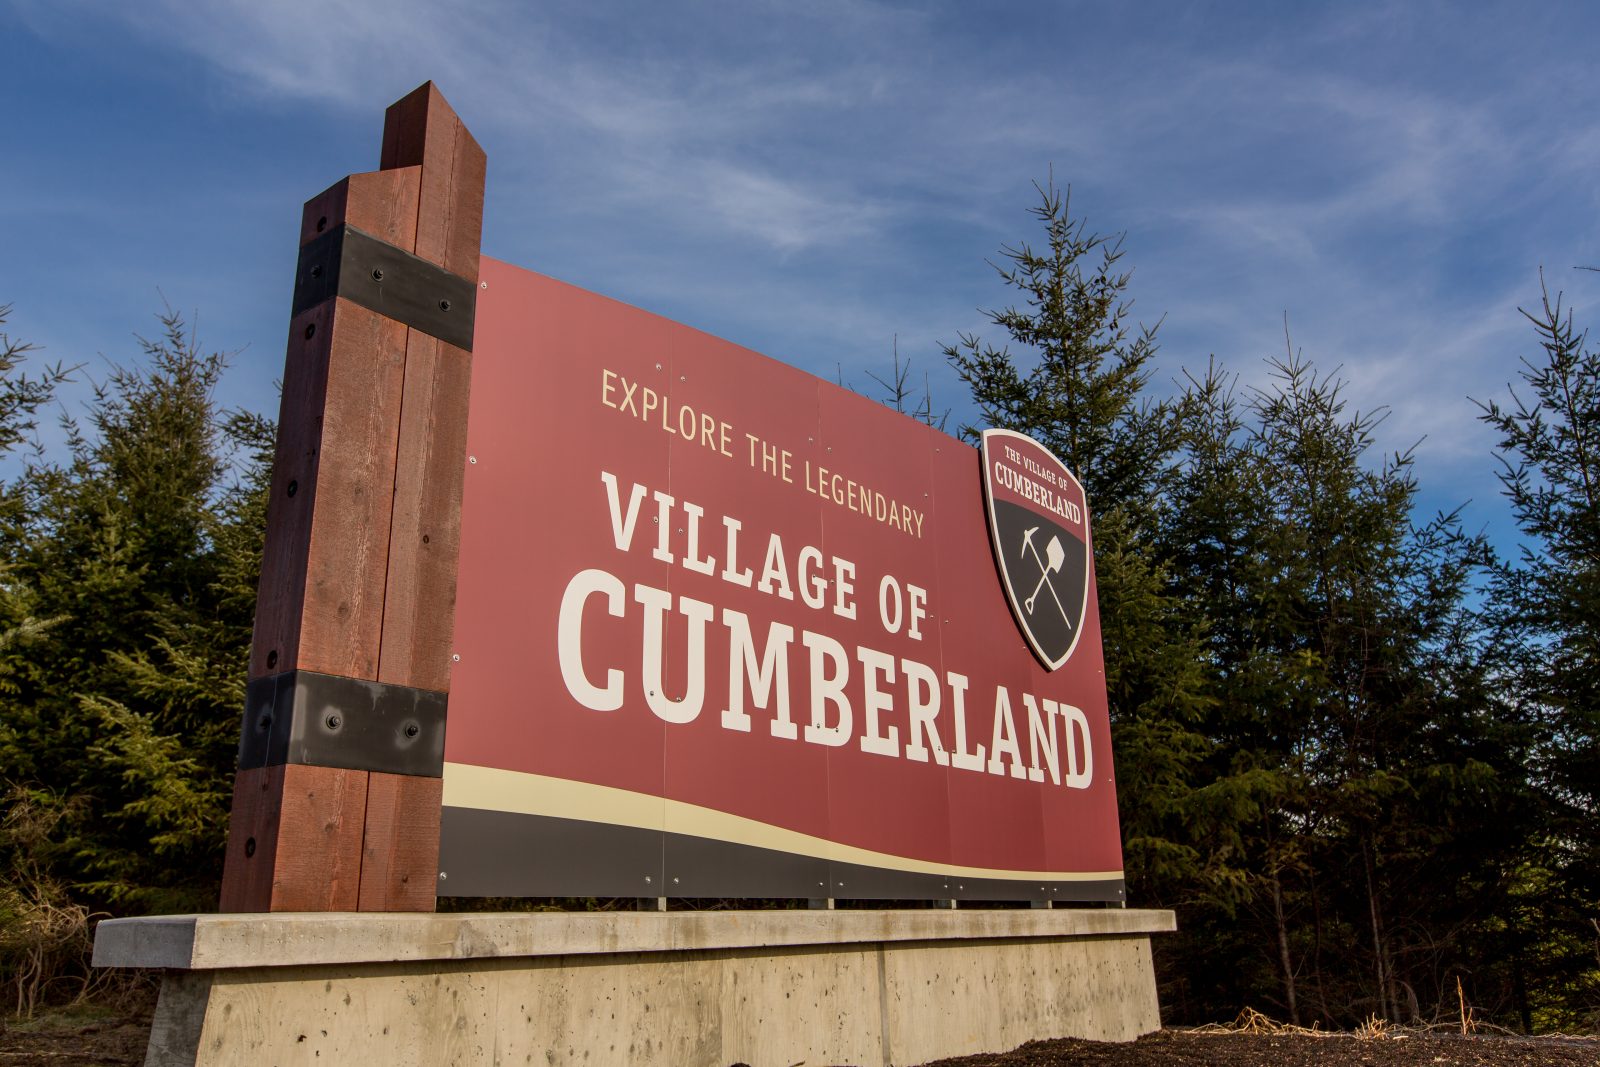 Cumberland sharing plans on fire hall, five-year budget - My Comox Valley Now